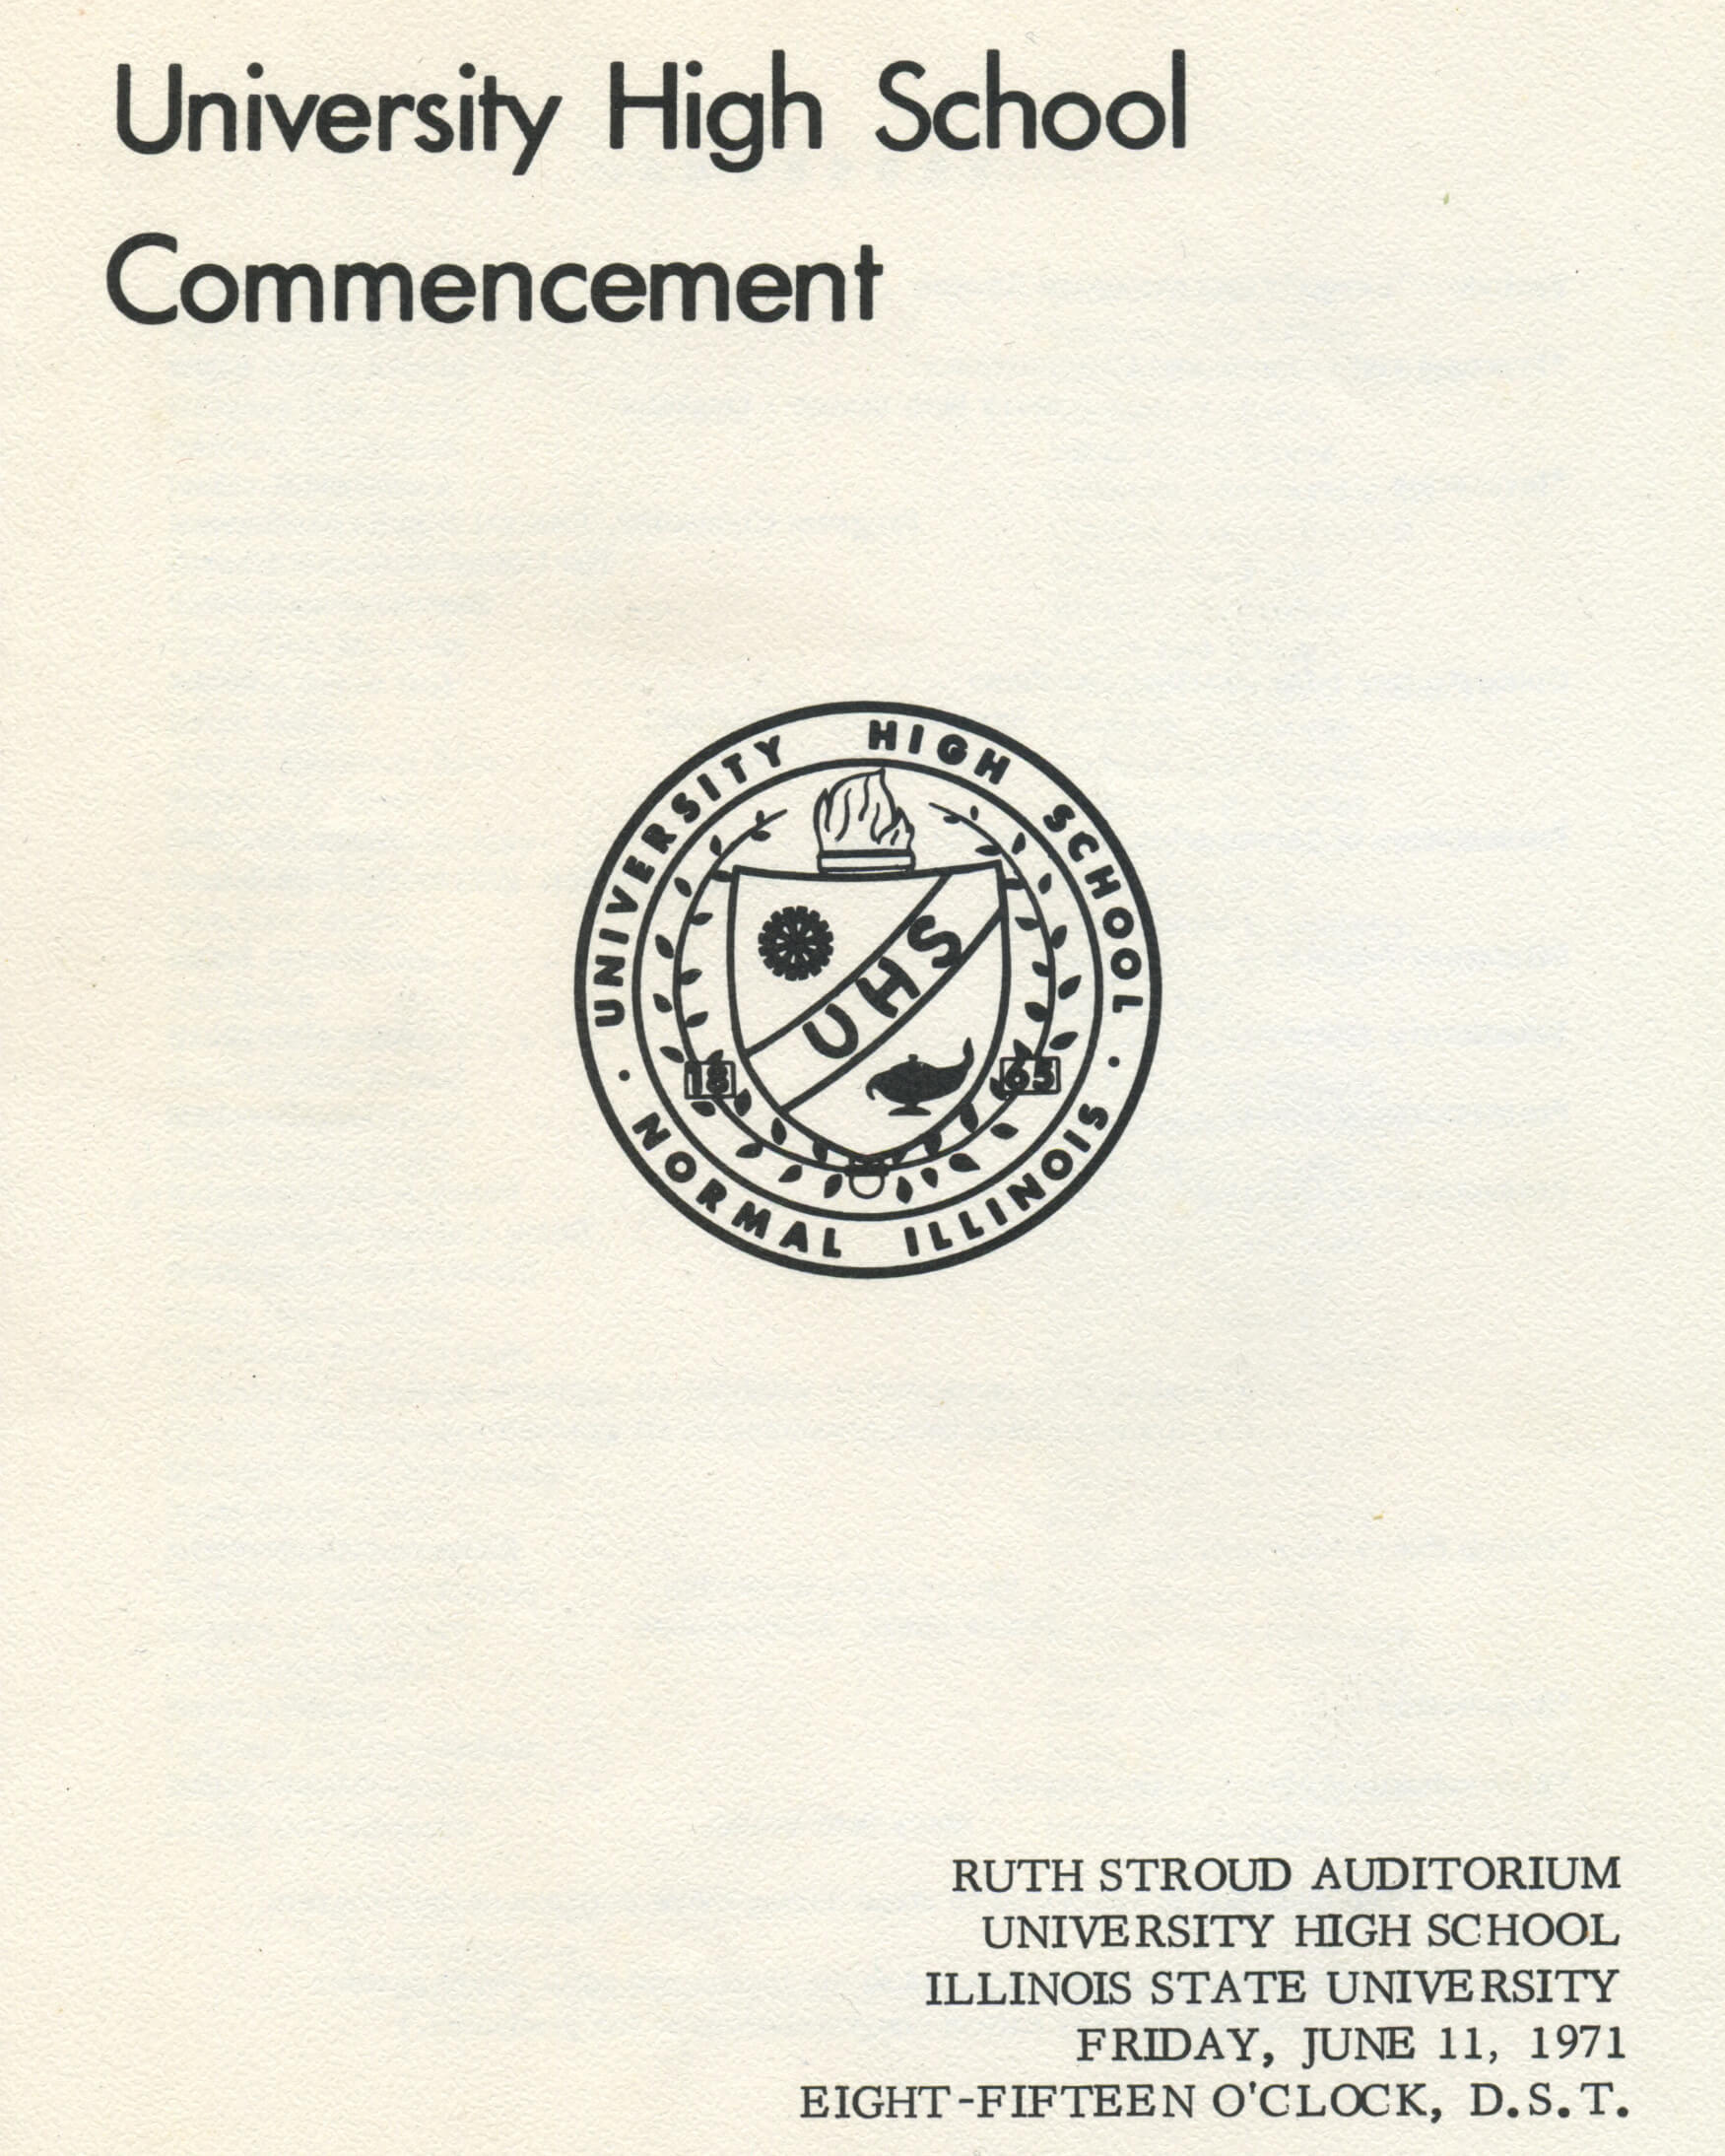 Commencement cover for University High School, 1971.